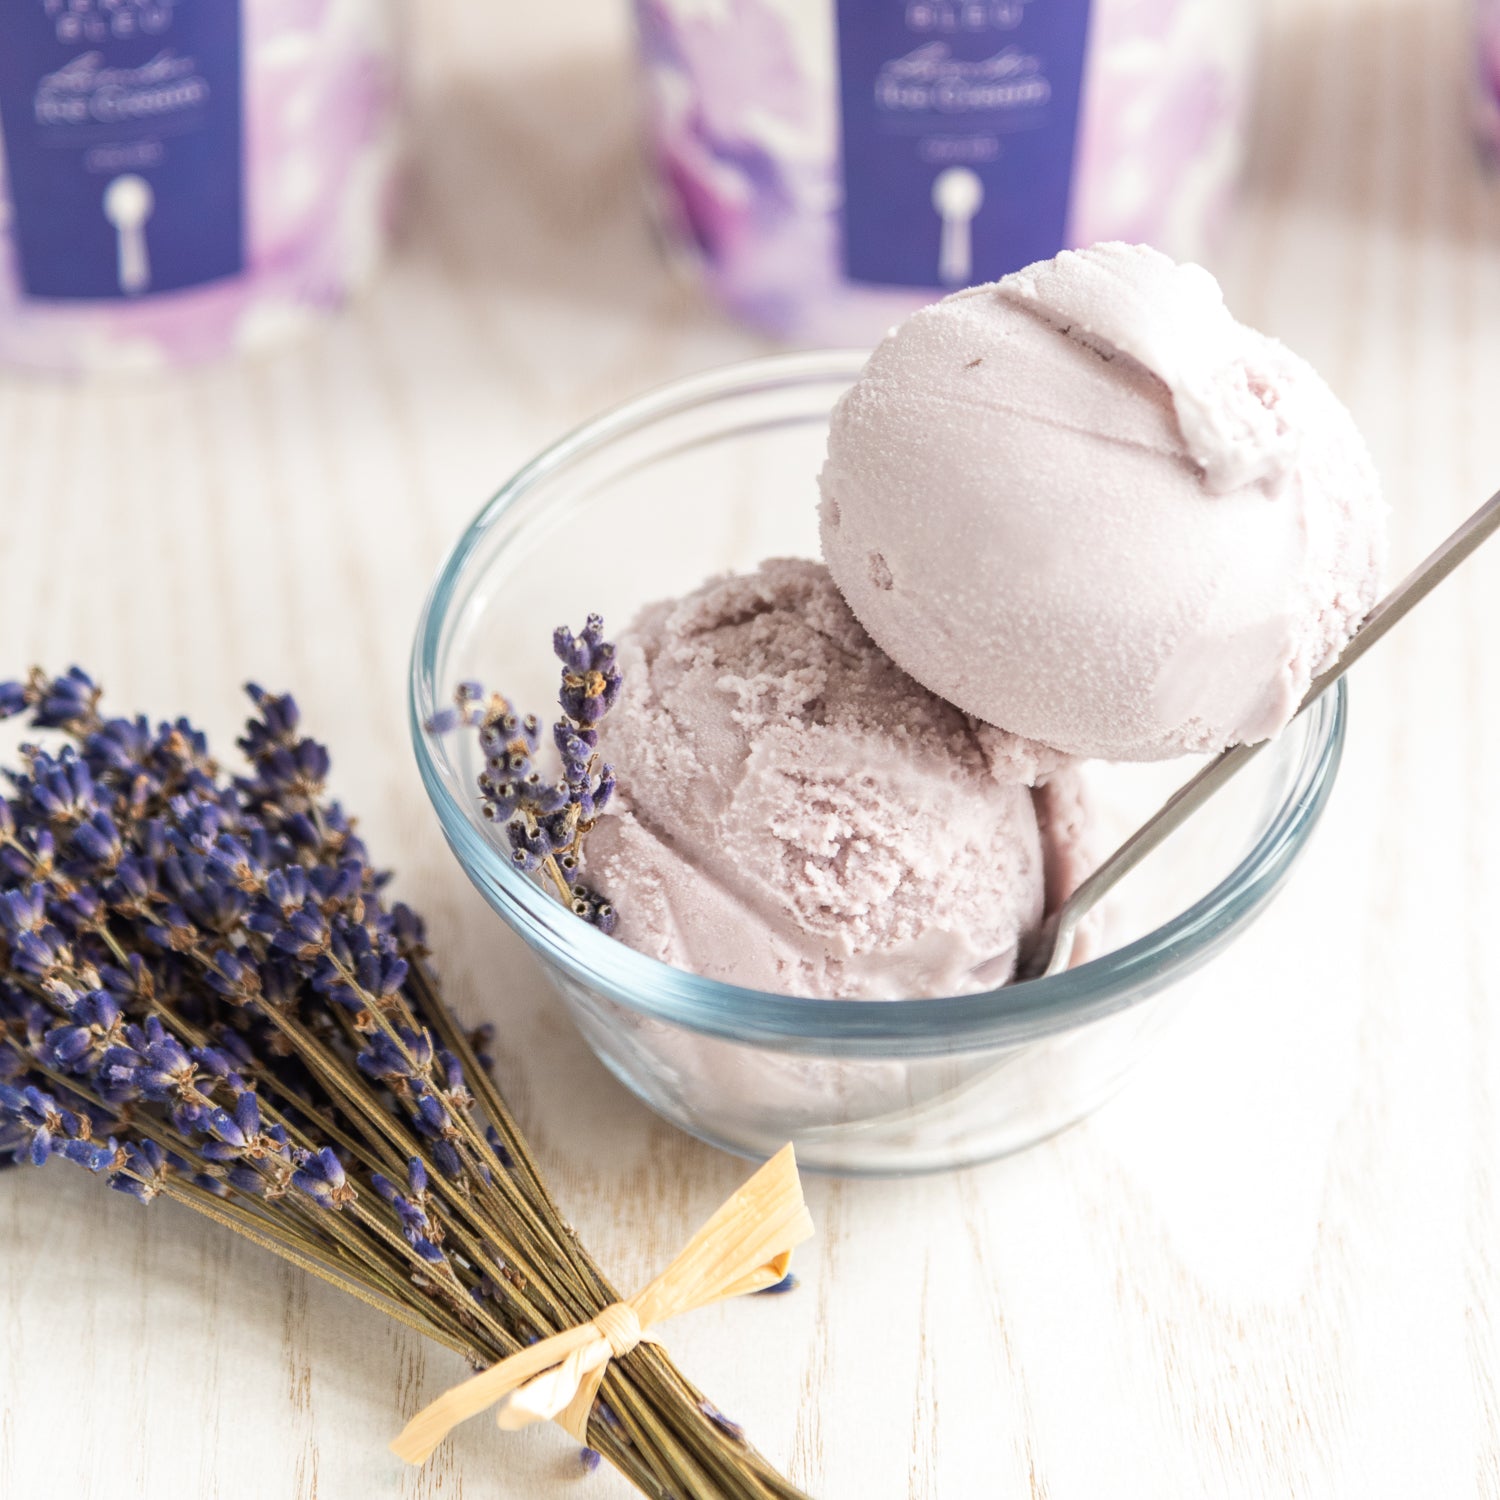 Lavender ice-cream in pint containers from Terre Bleu. 